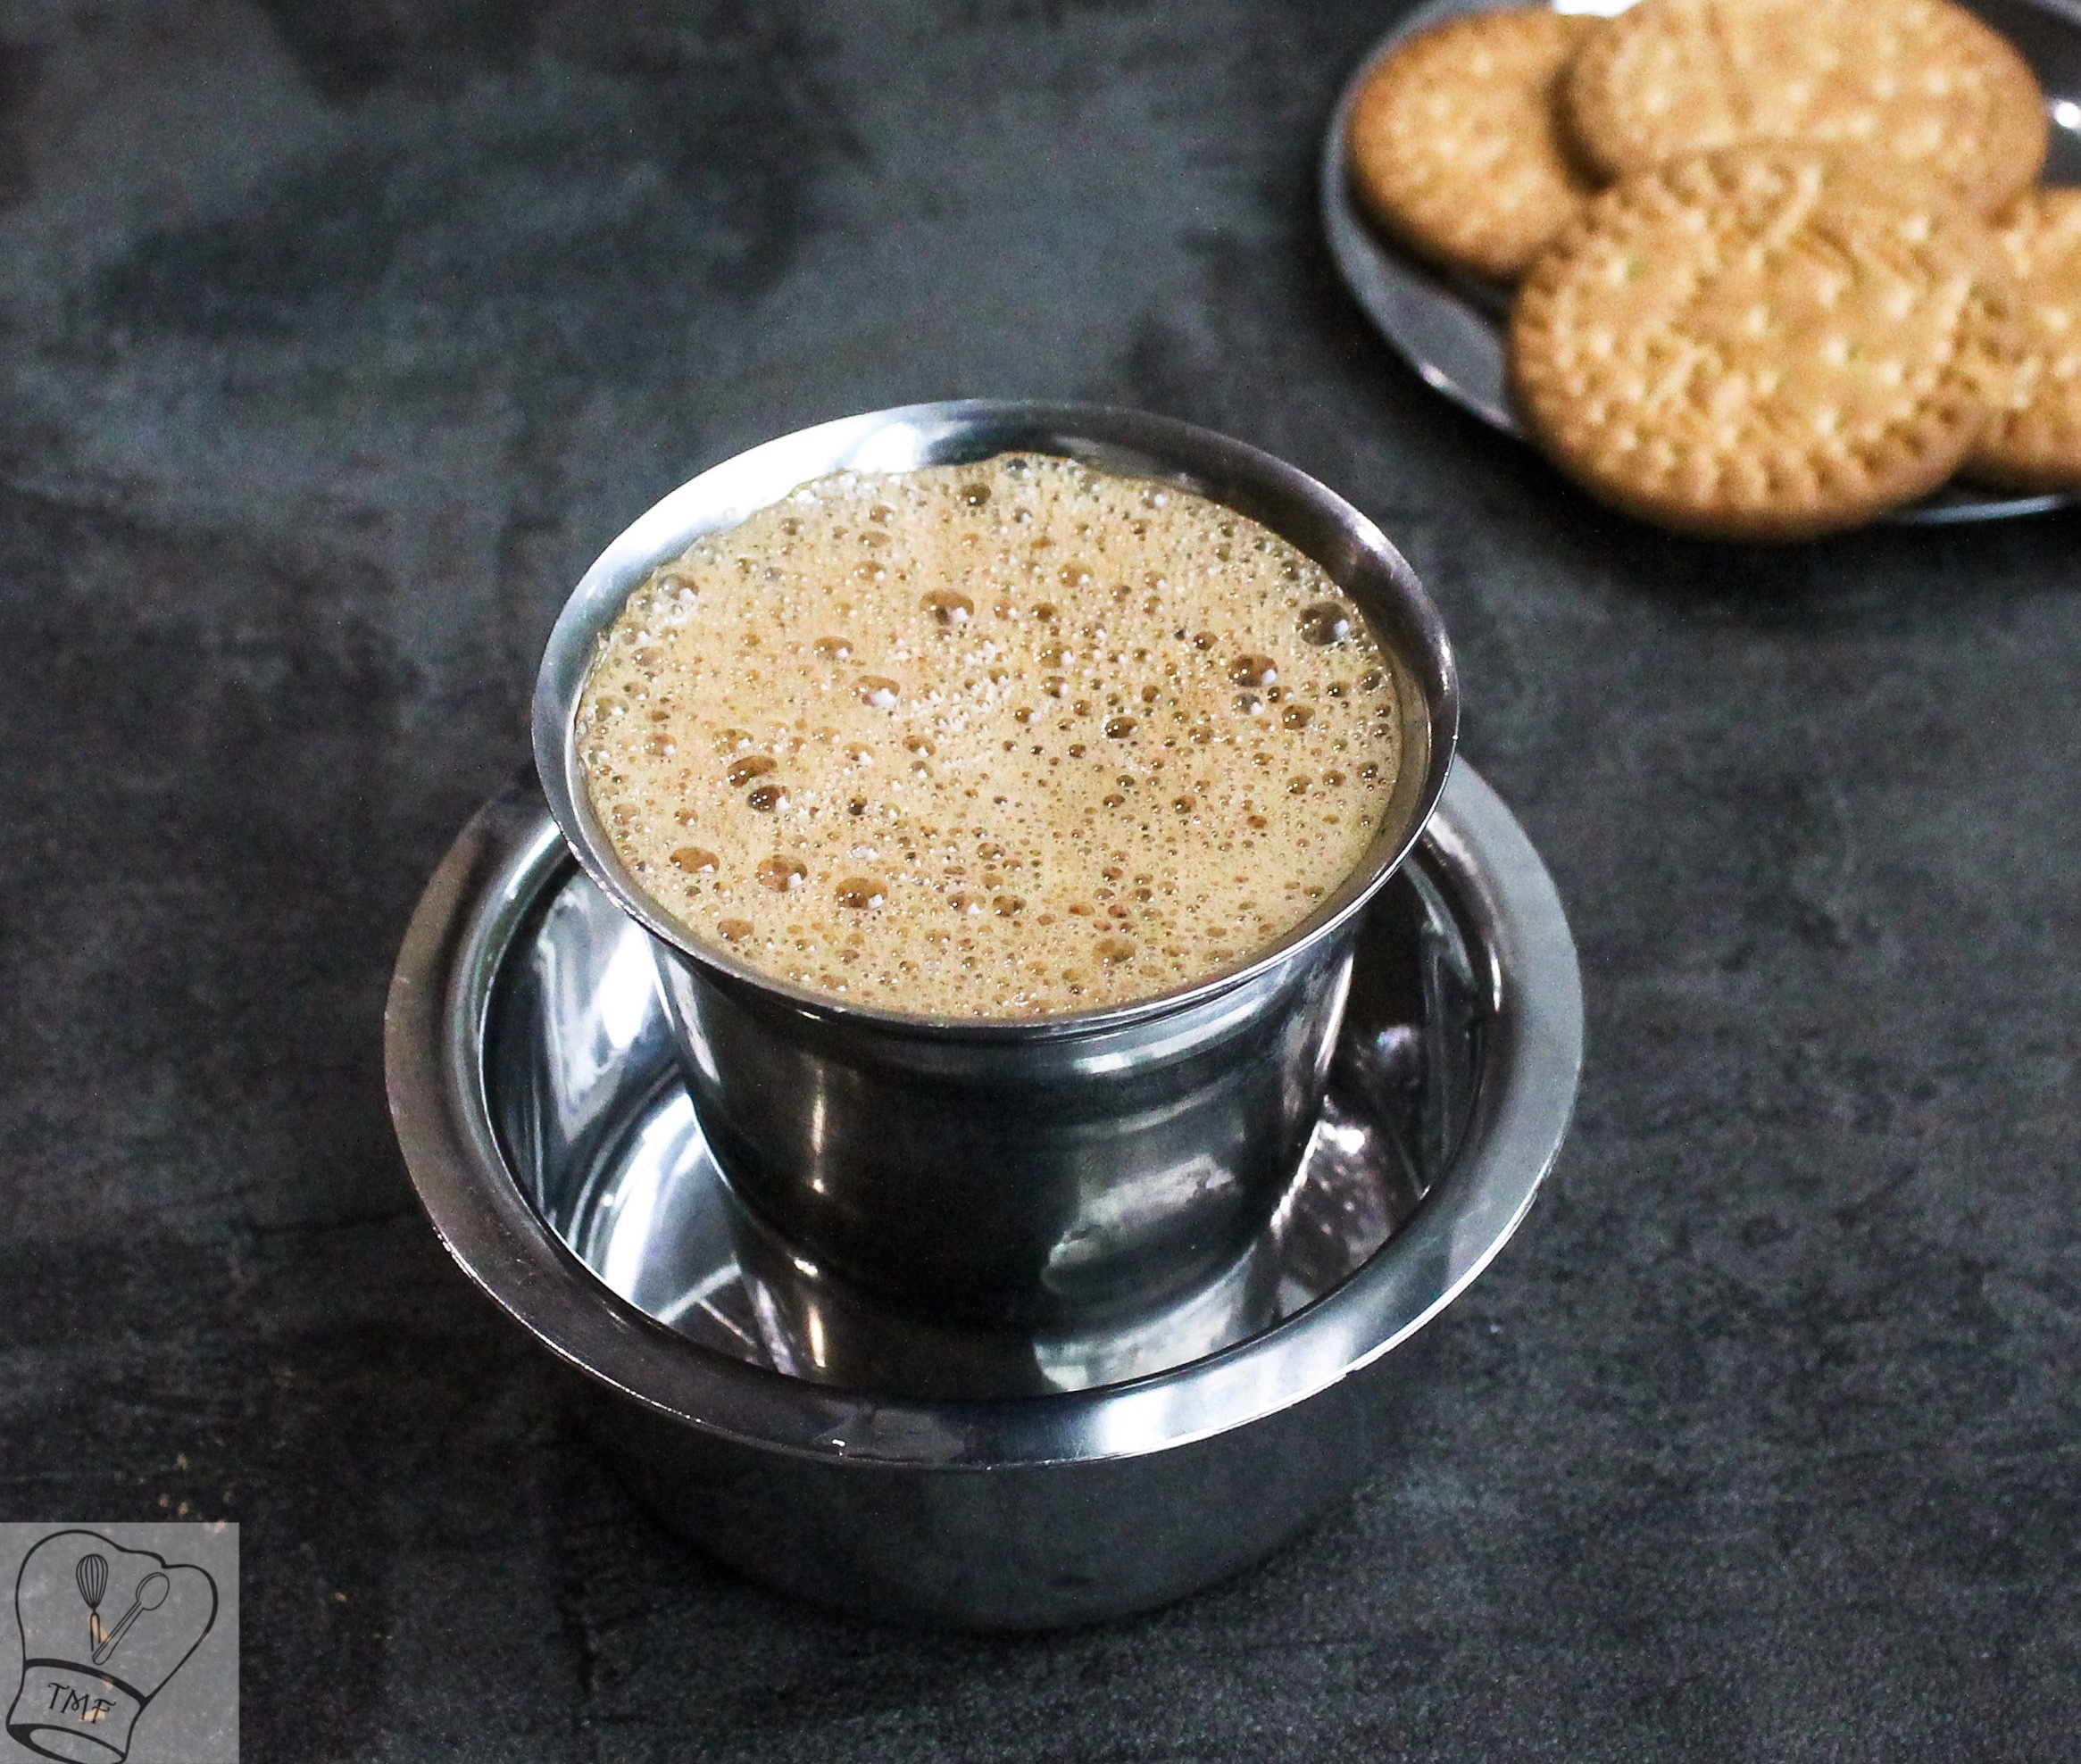 How to make South Indian Filter Coffee?